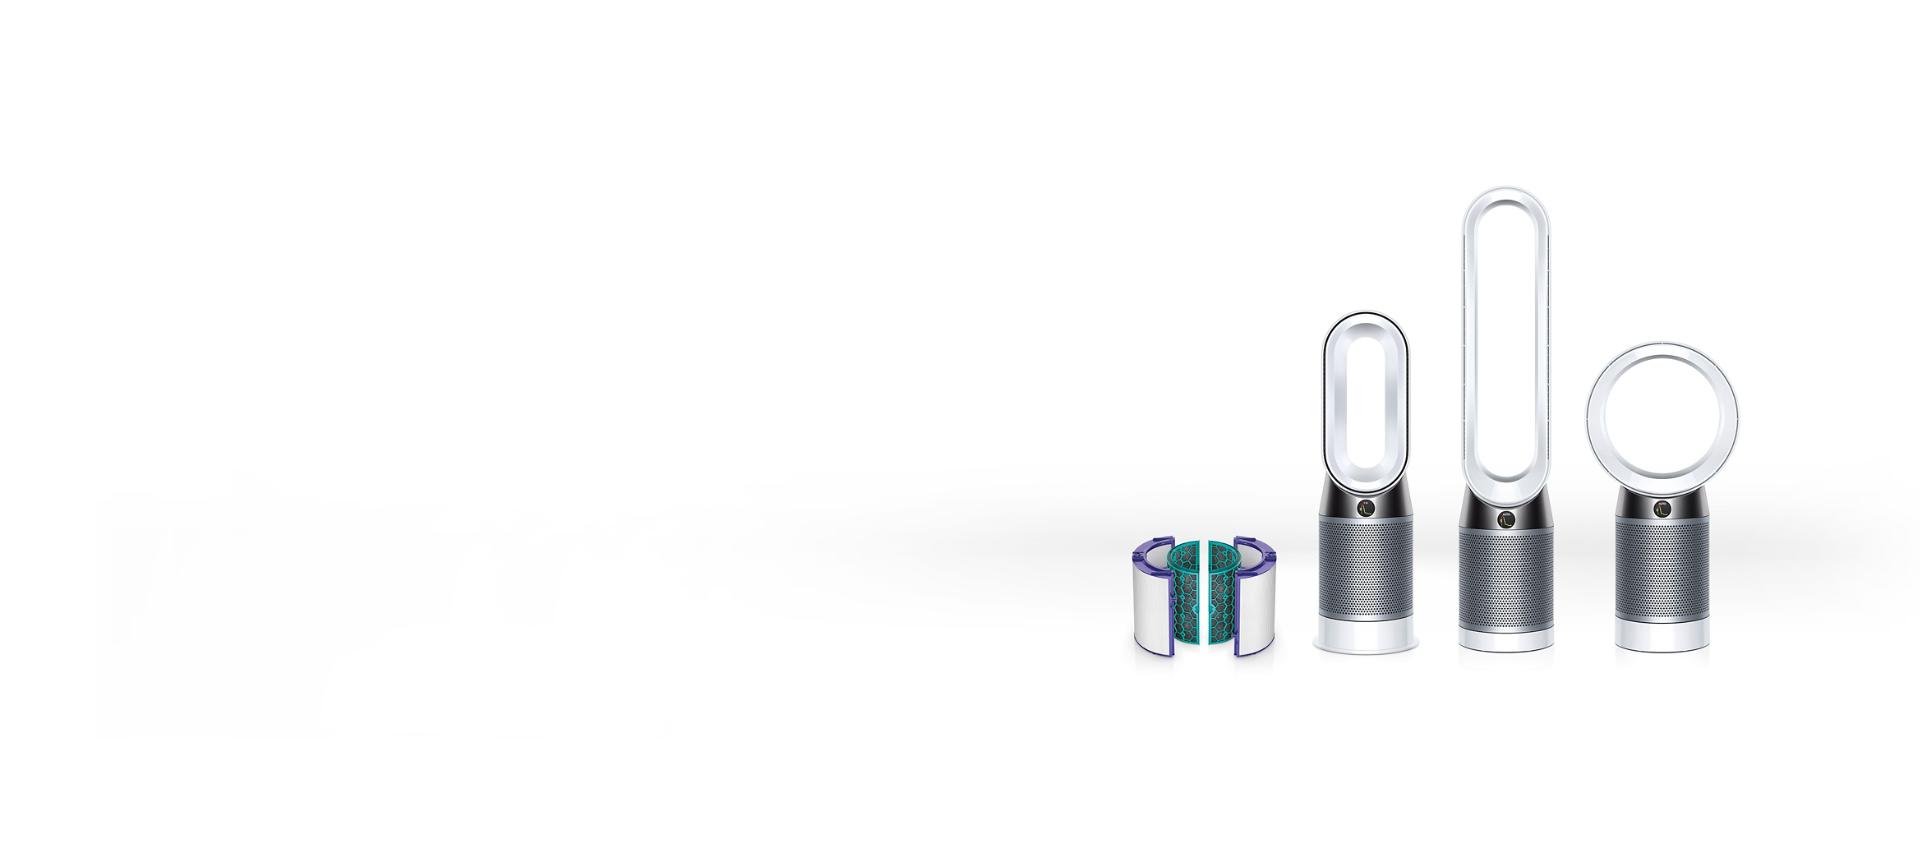 Dyson purifier range in a row including a filter